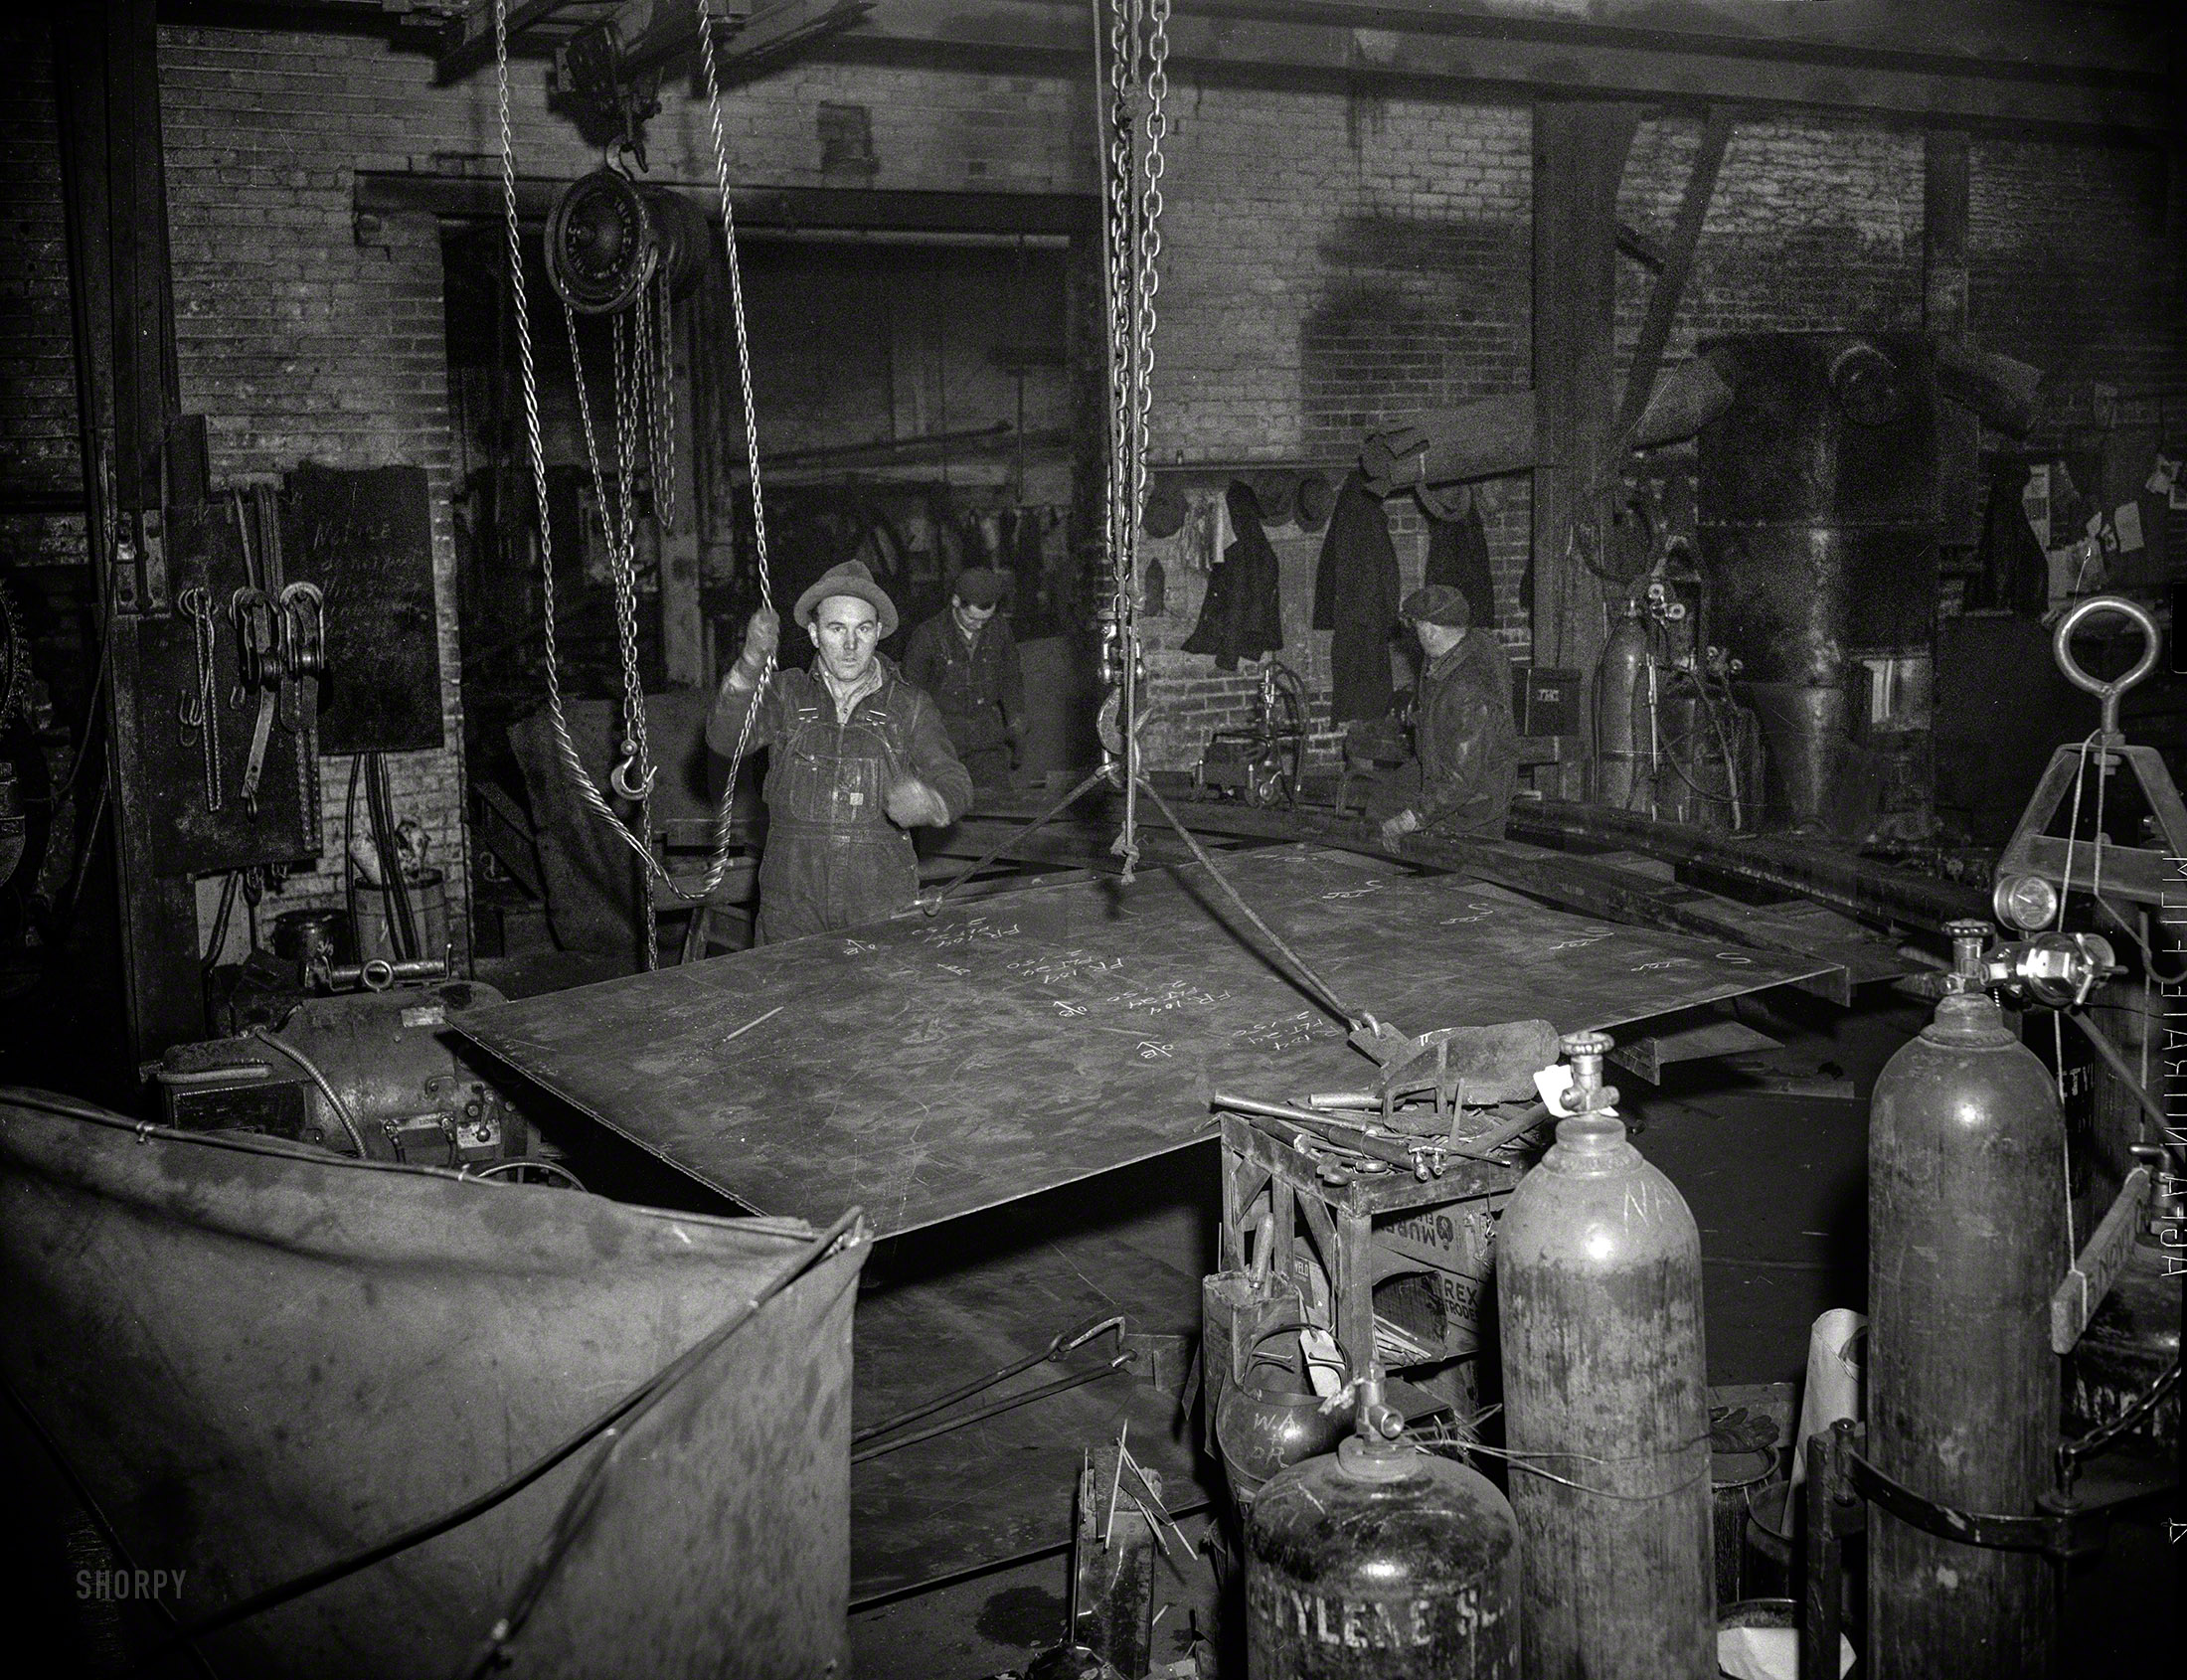 May 1942. "Denver, Colorado. Interior of a shipbuilding plant, showing workman who previously assembled incubator parts and amusement park devices, now working on hulls and decks of escort vessels. He and his co-workers will be invited to Mare Island, 1,300 miles away, to help launch the ships they are building." 4x5 nitrate negative for the Office of War Information. View full size.